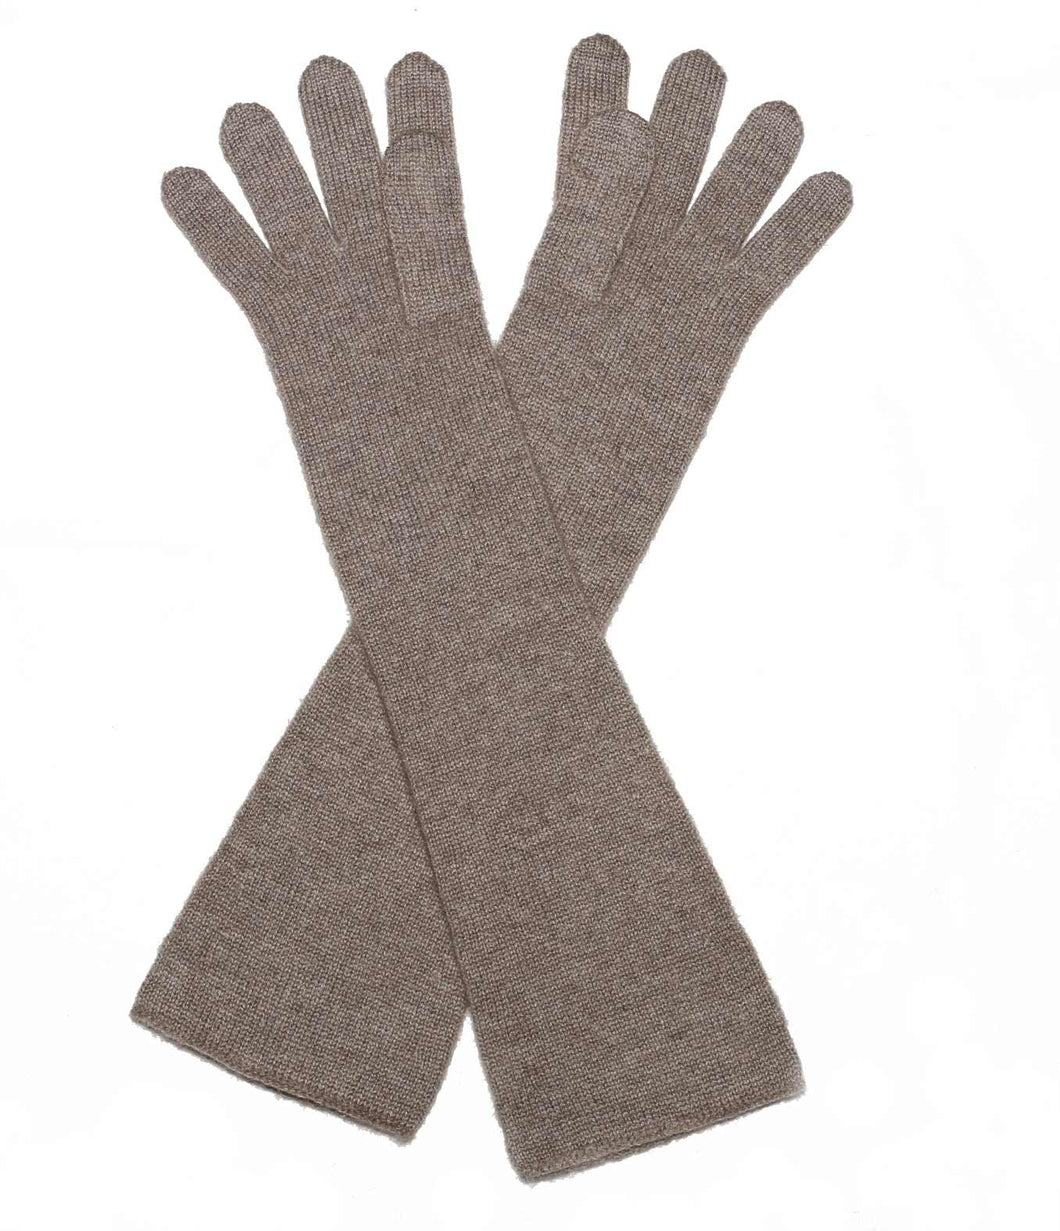 engage cashmere gloves with long cuffs